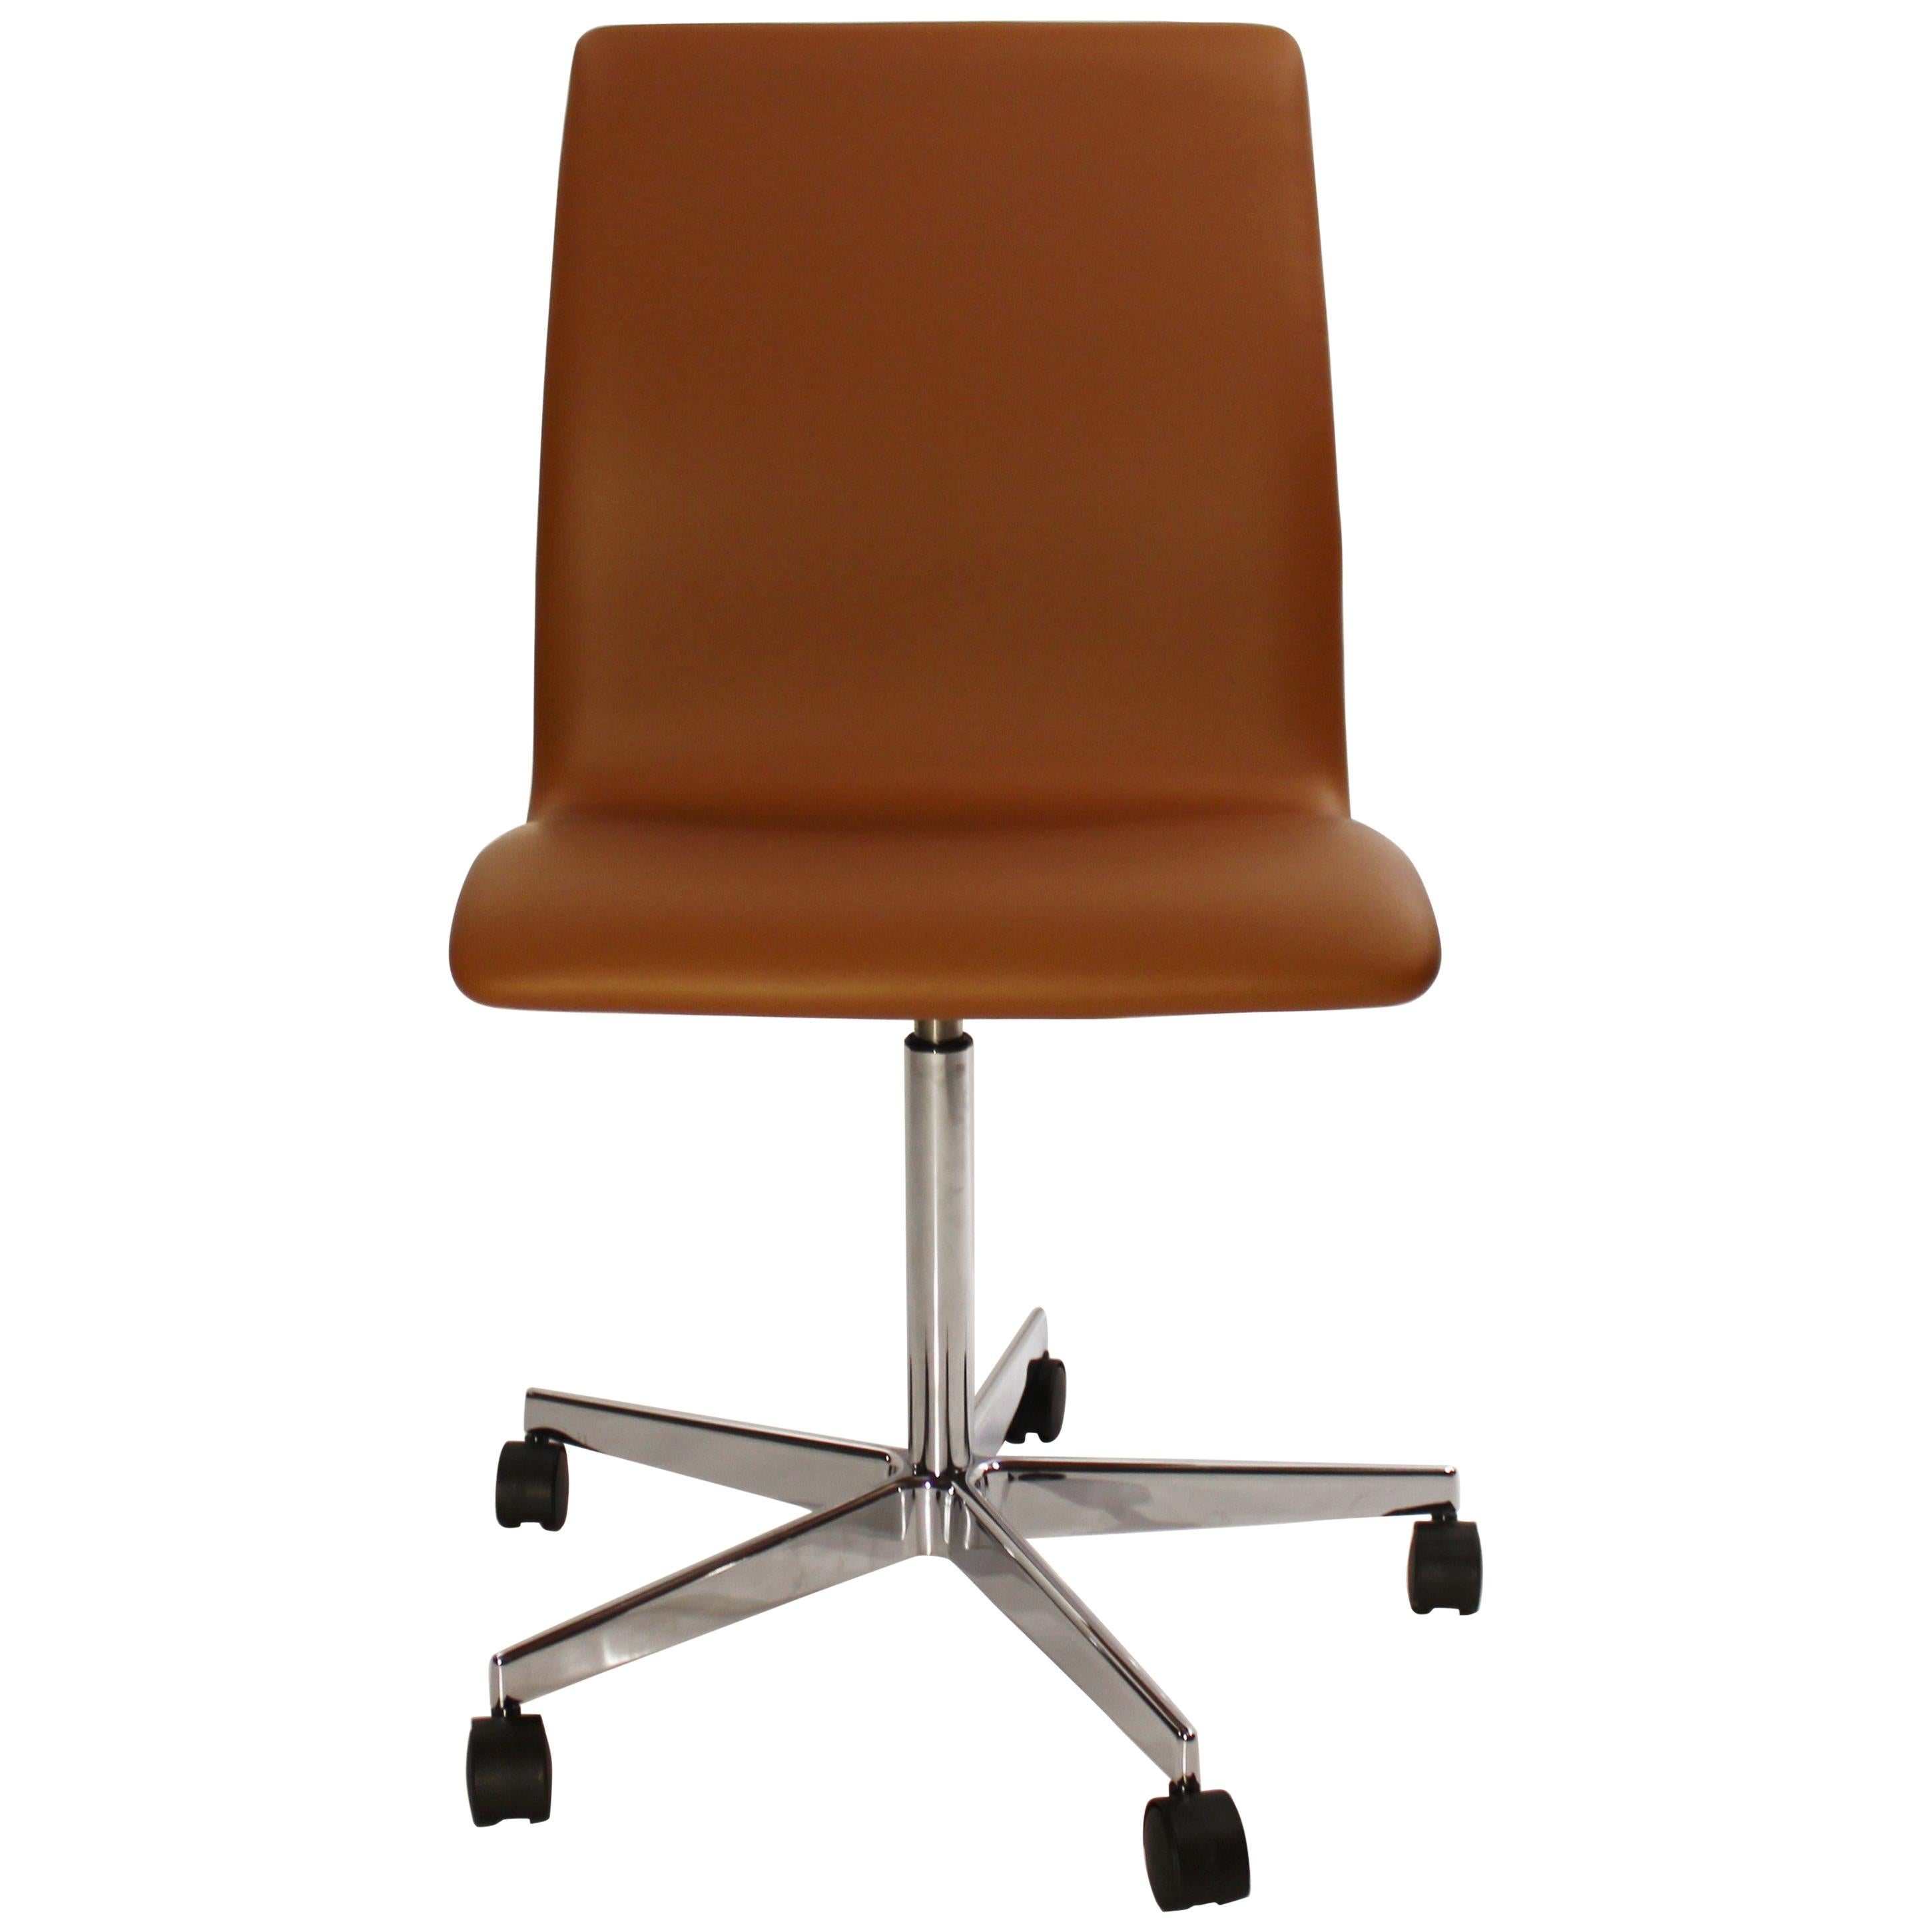 Oxford Classic Office Chair, Model 3171, by Arne Jacobsen and Fritz Hansen